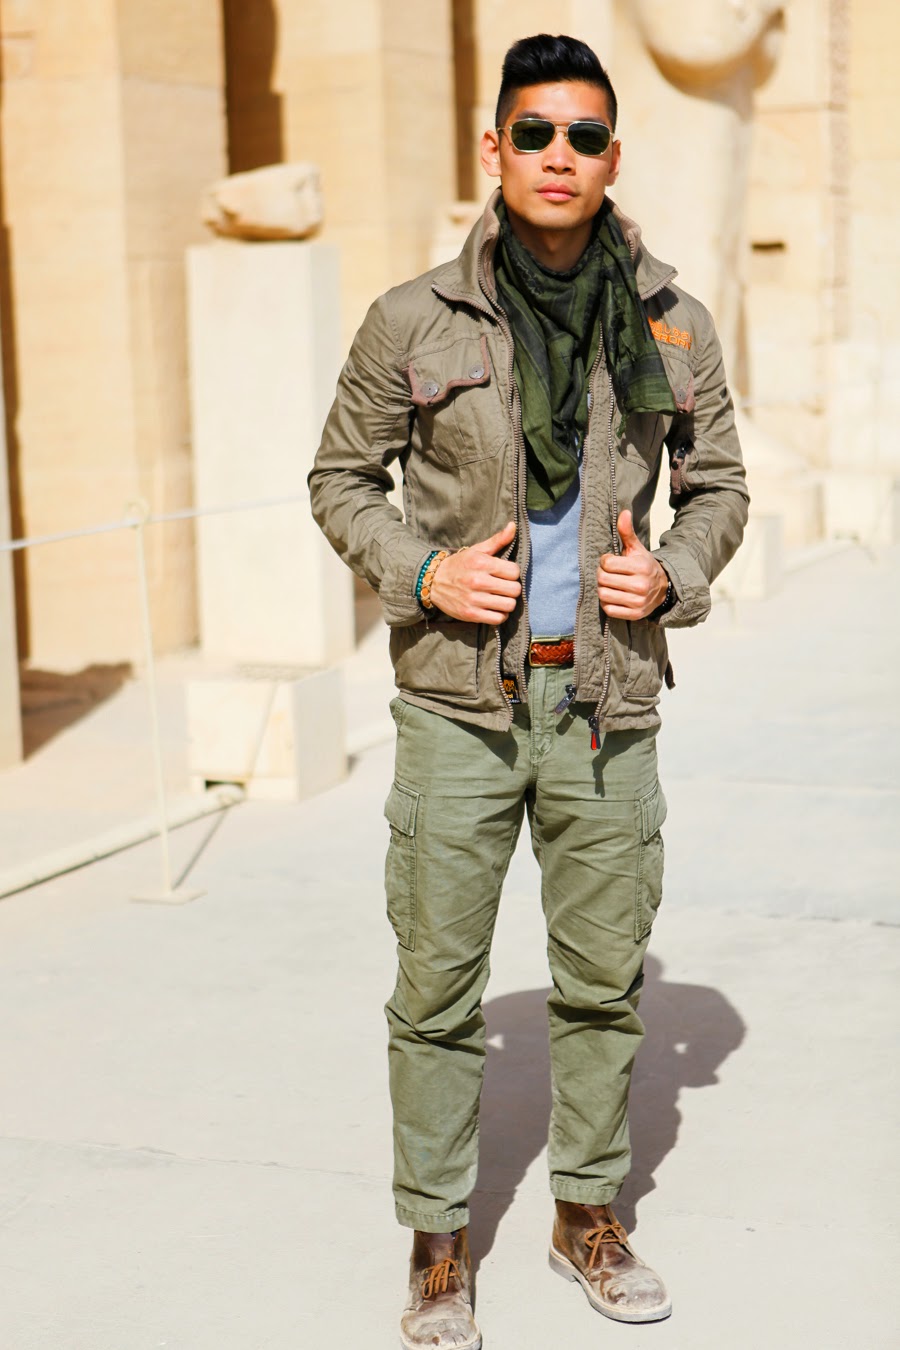 Levitate Style - Luxor, Egypt Outfit, Superdry